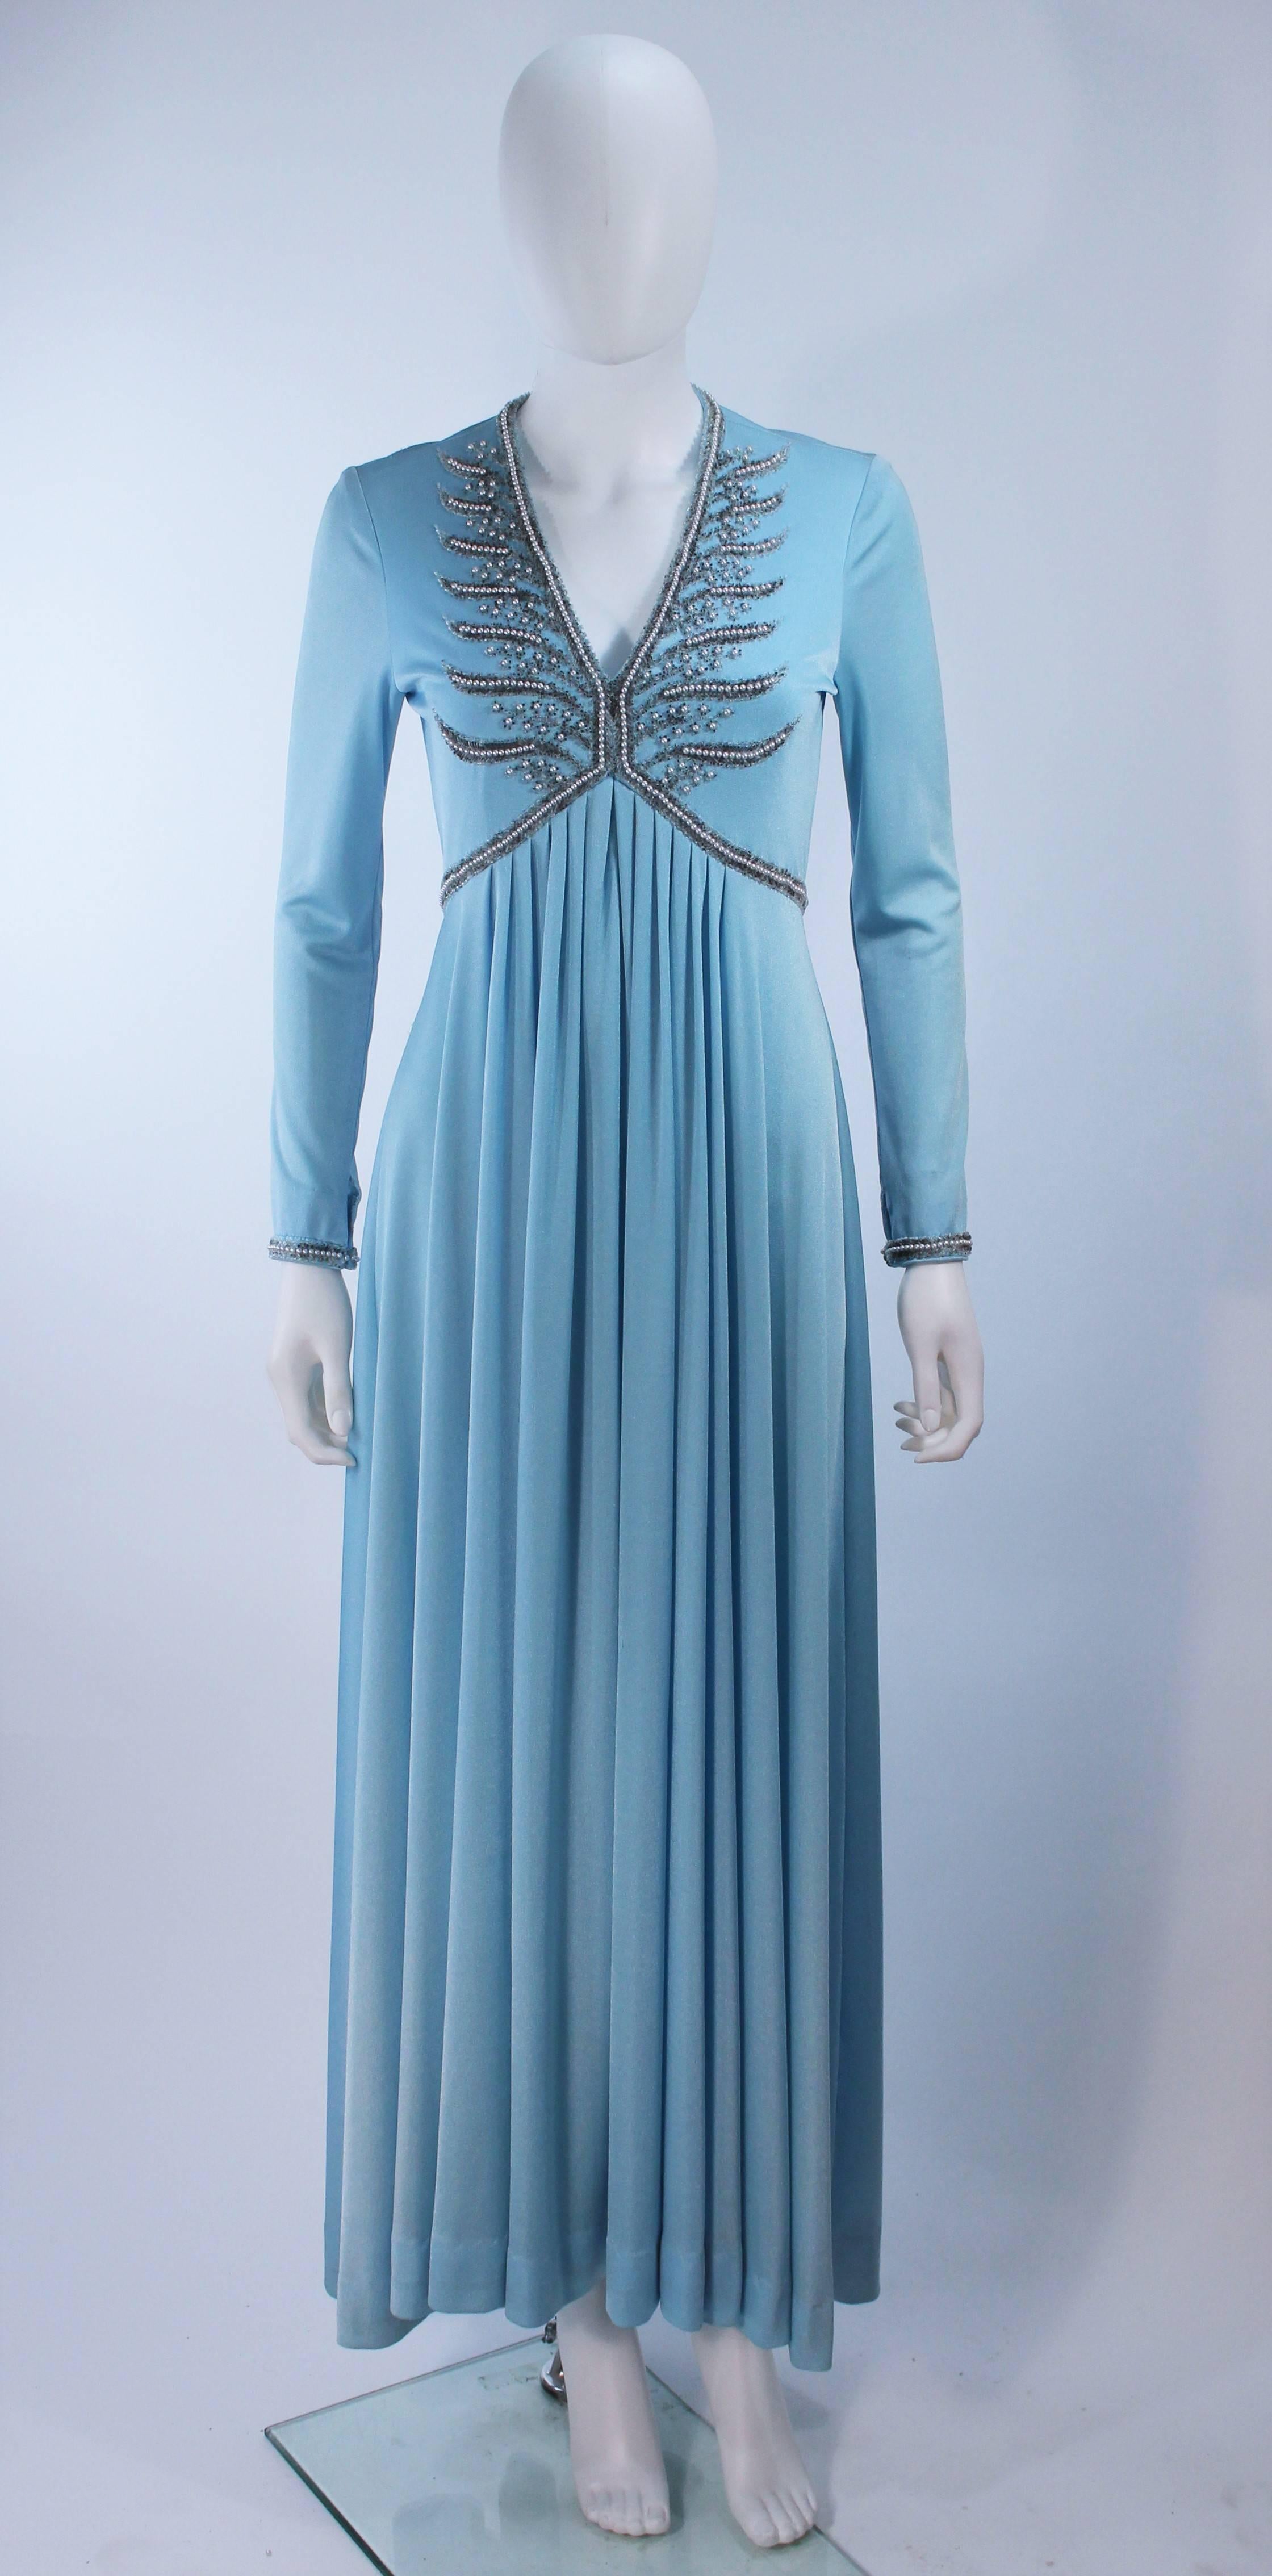 This gown is composed of a blue jersey with a beaded applique on the bust and sleeves. Features a draped design with a center back zipper closure, and hook & eyes at the sleeve end. In excellent vintage condition (there are some missing beads, but